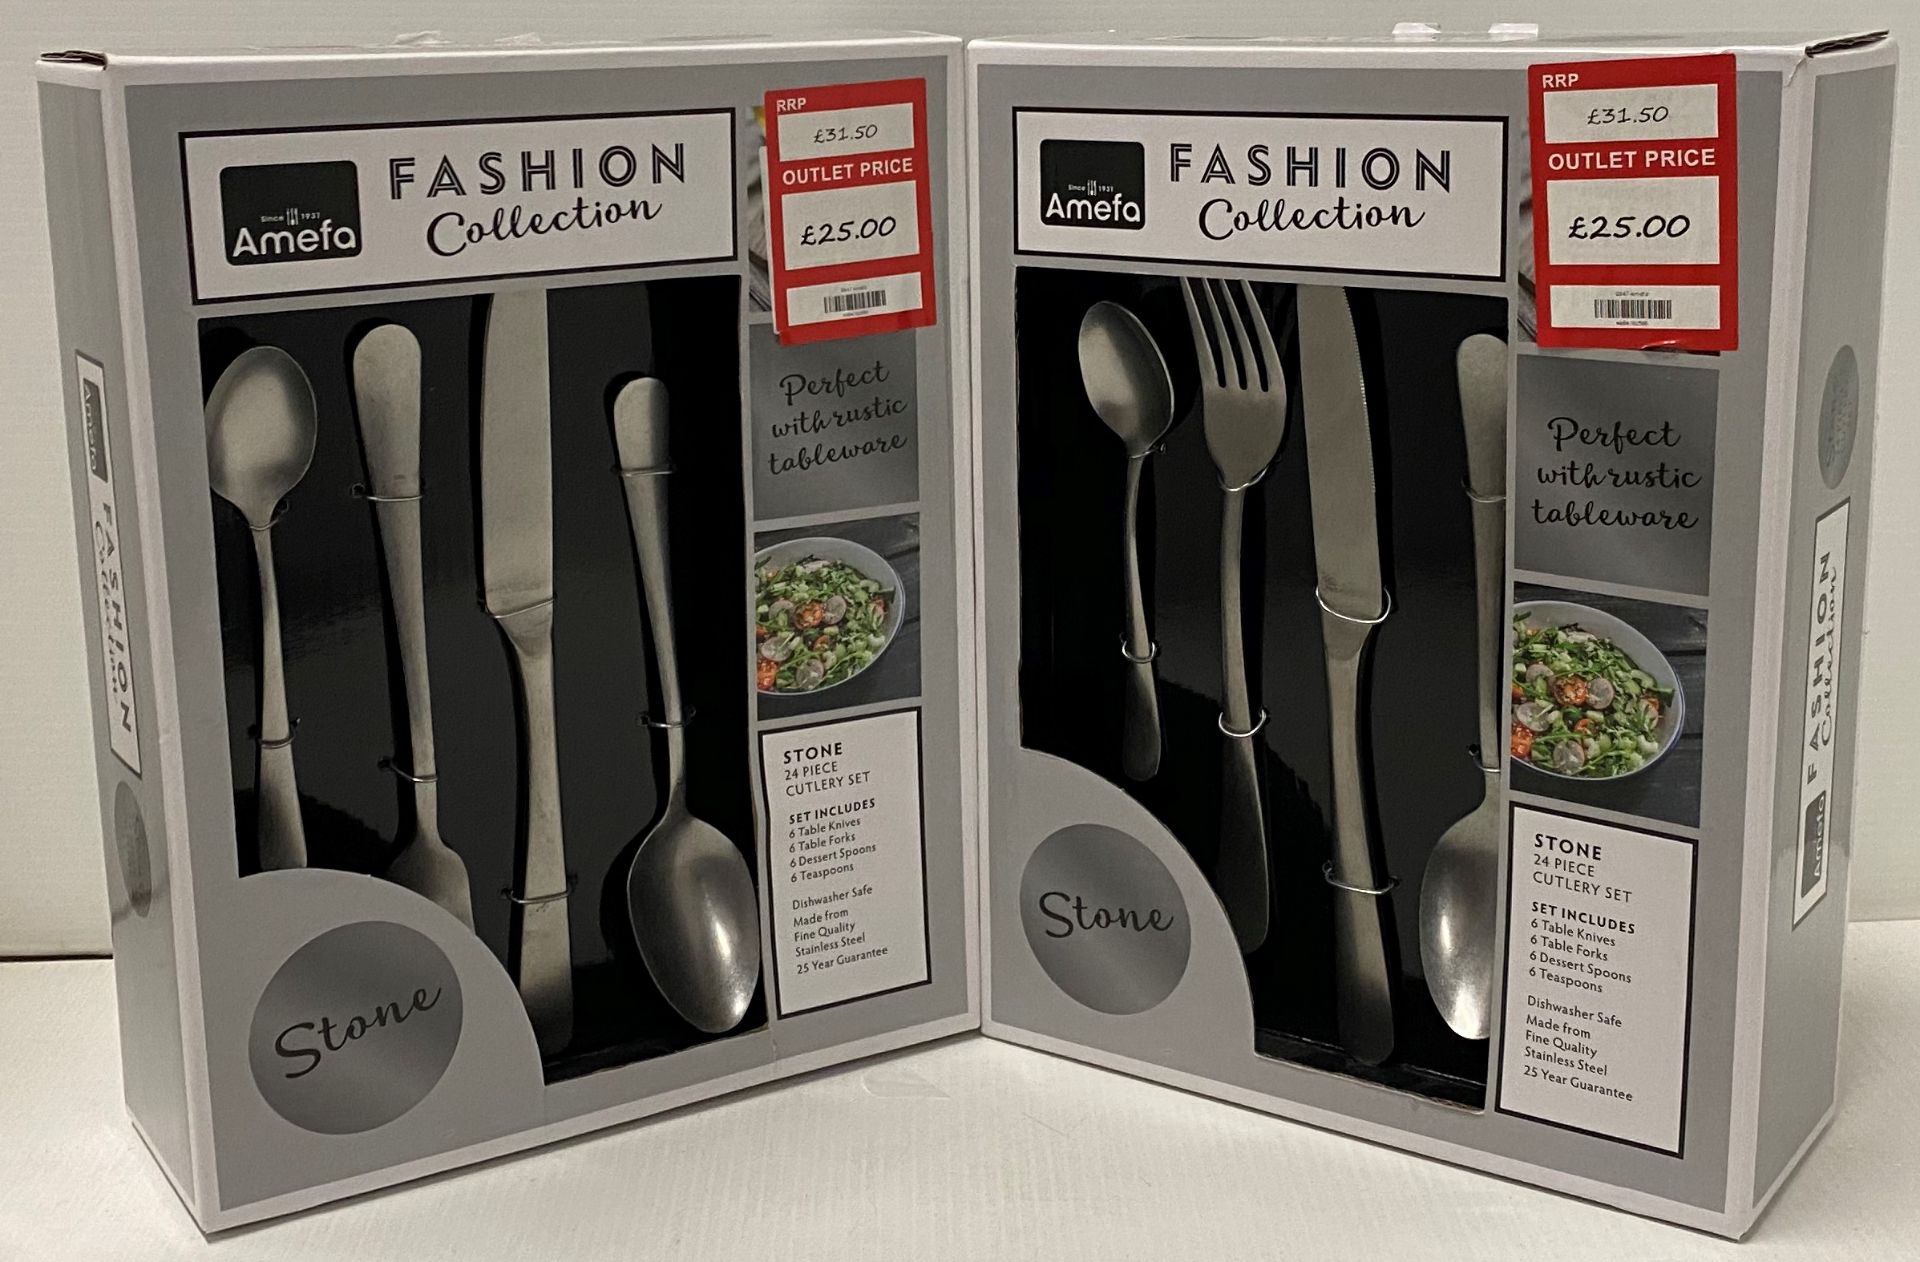 2 x Amefa Fashion Collection Stone 24 piece cutlery sets RRP £31.